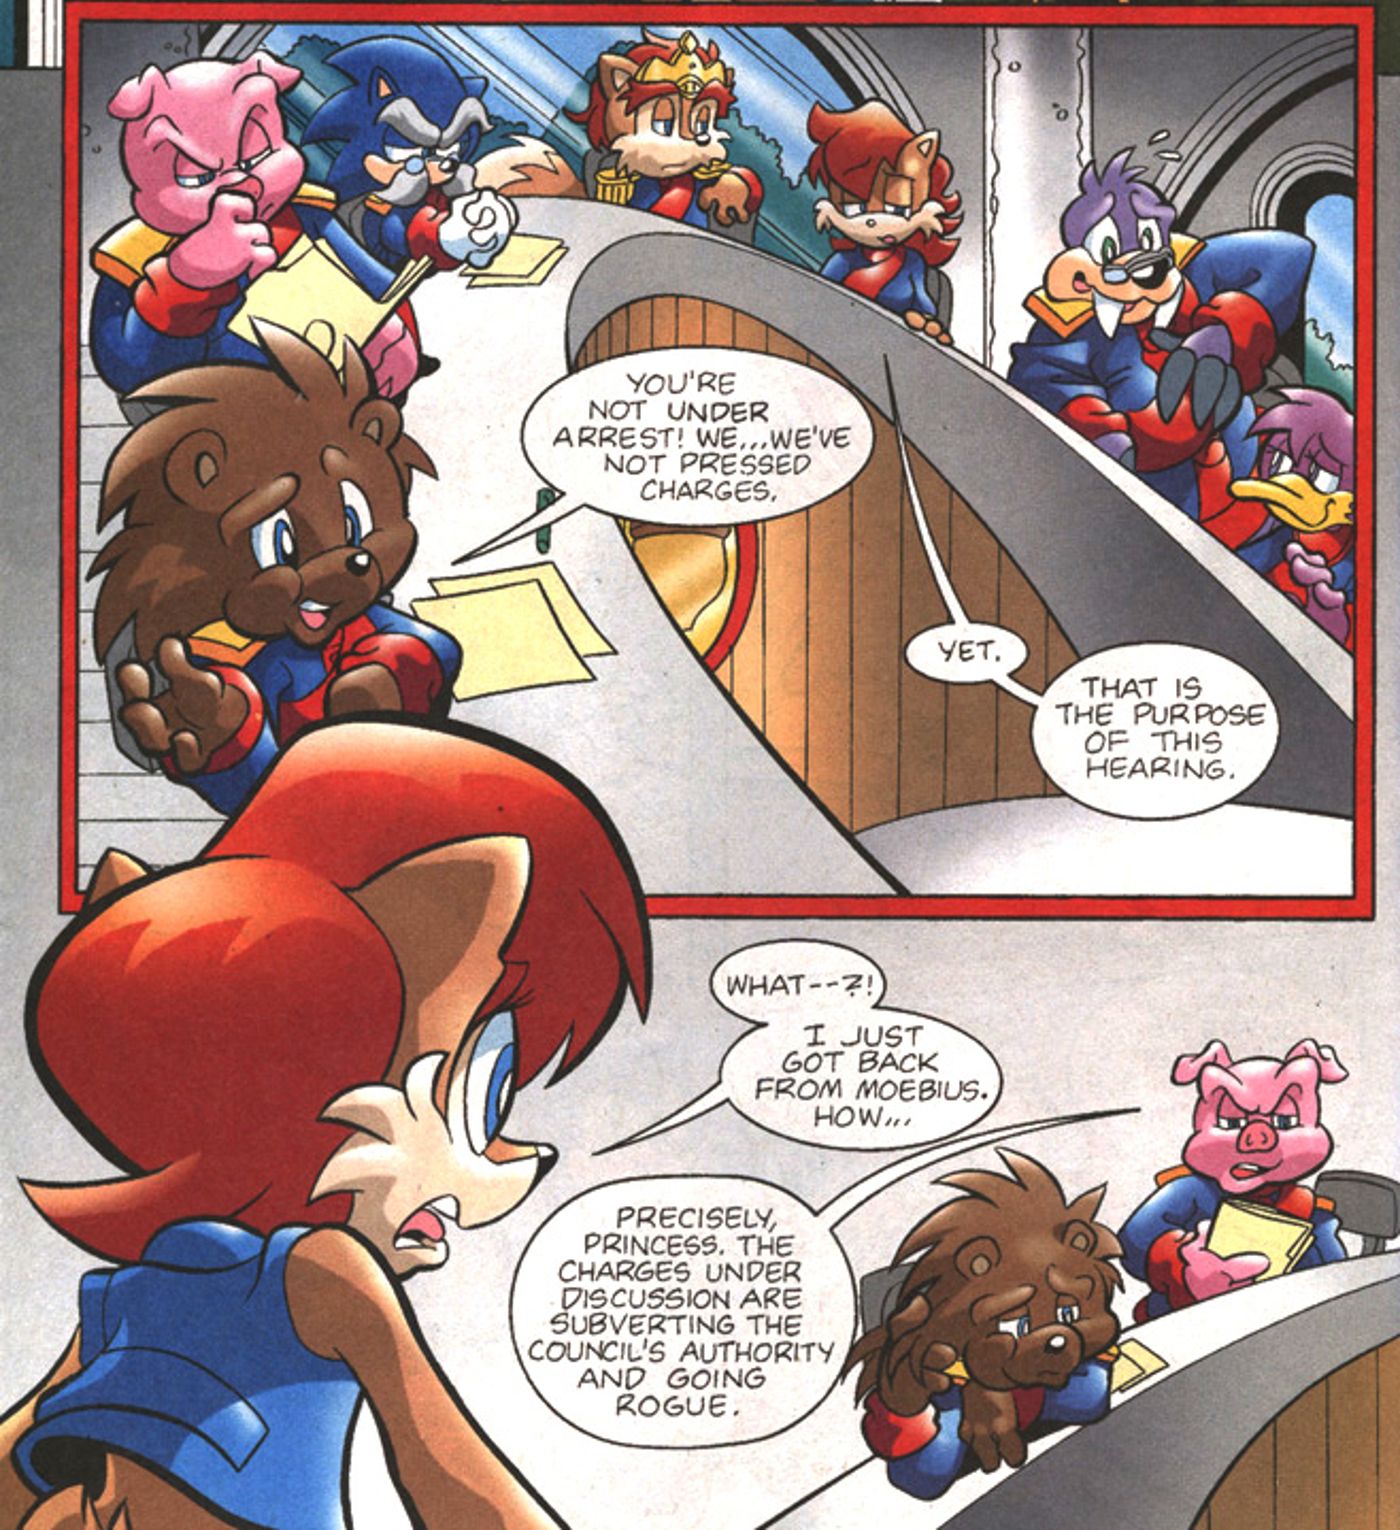 Princess Sally defends herself against the elected council for the Kingdom of Acorn in Sonic the Hedgehog #197.